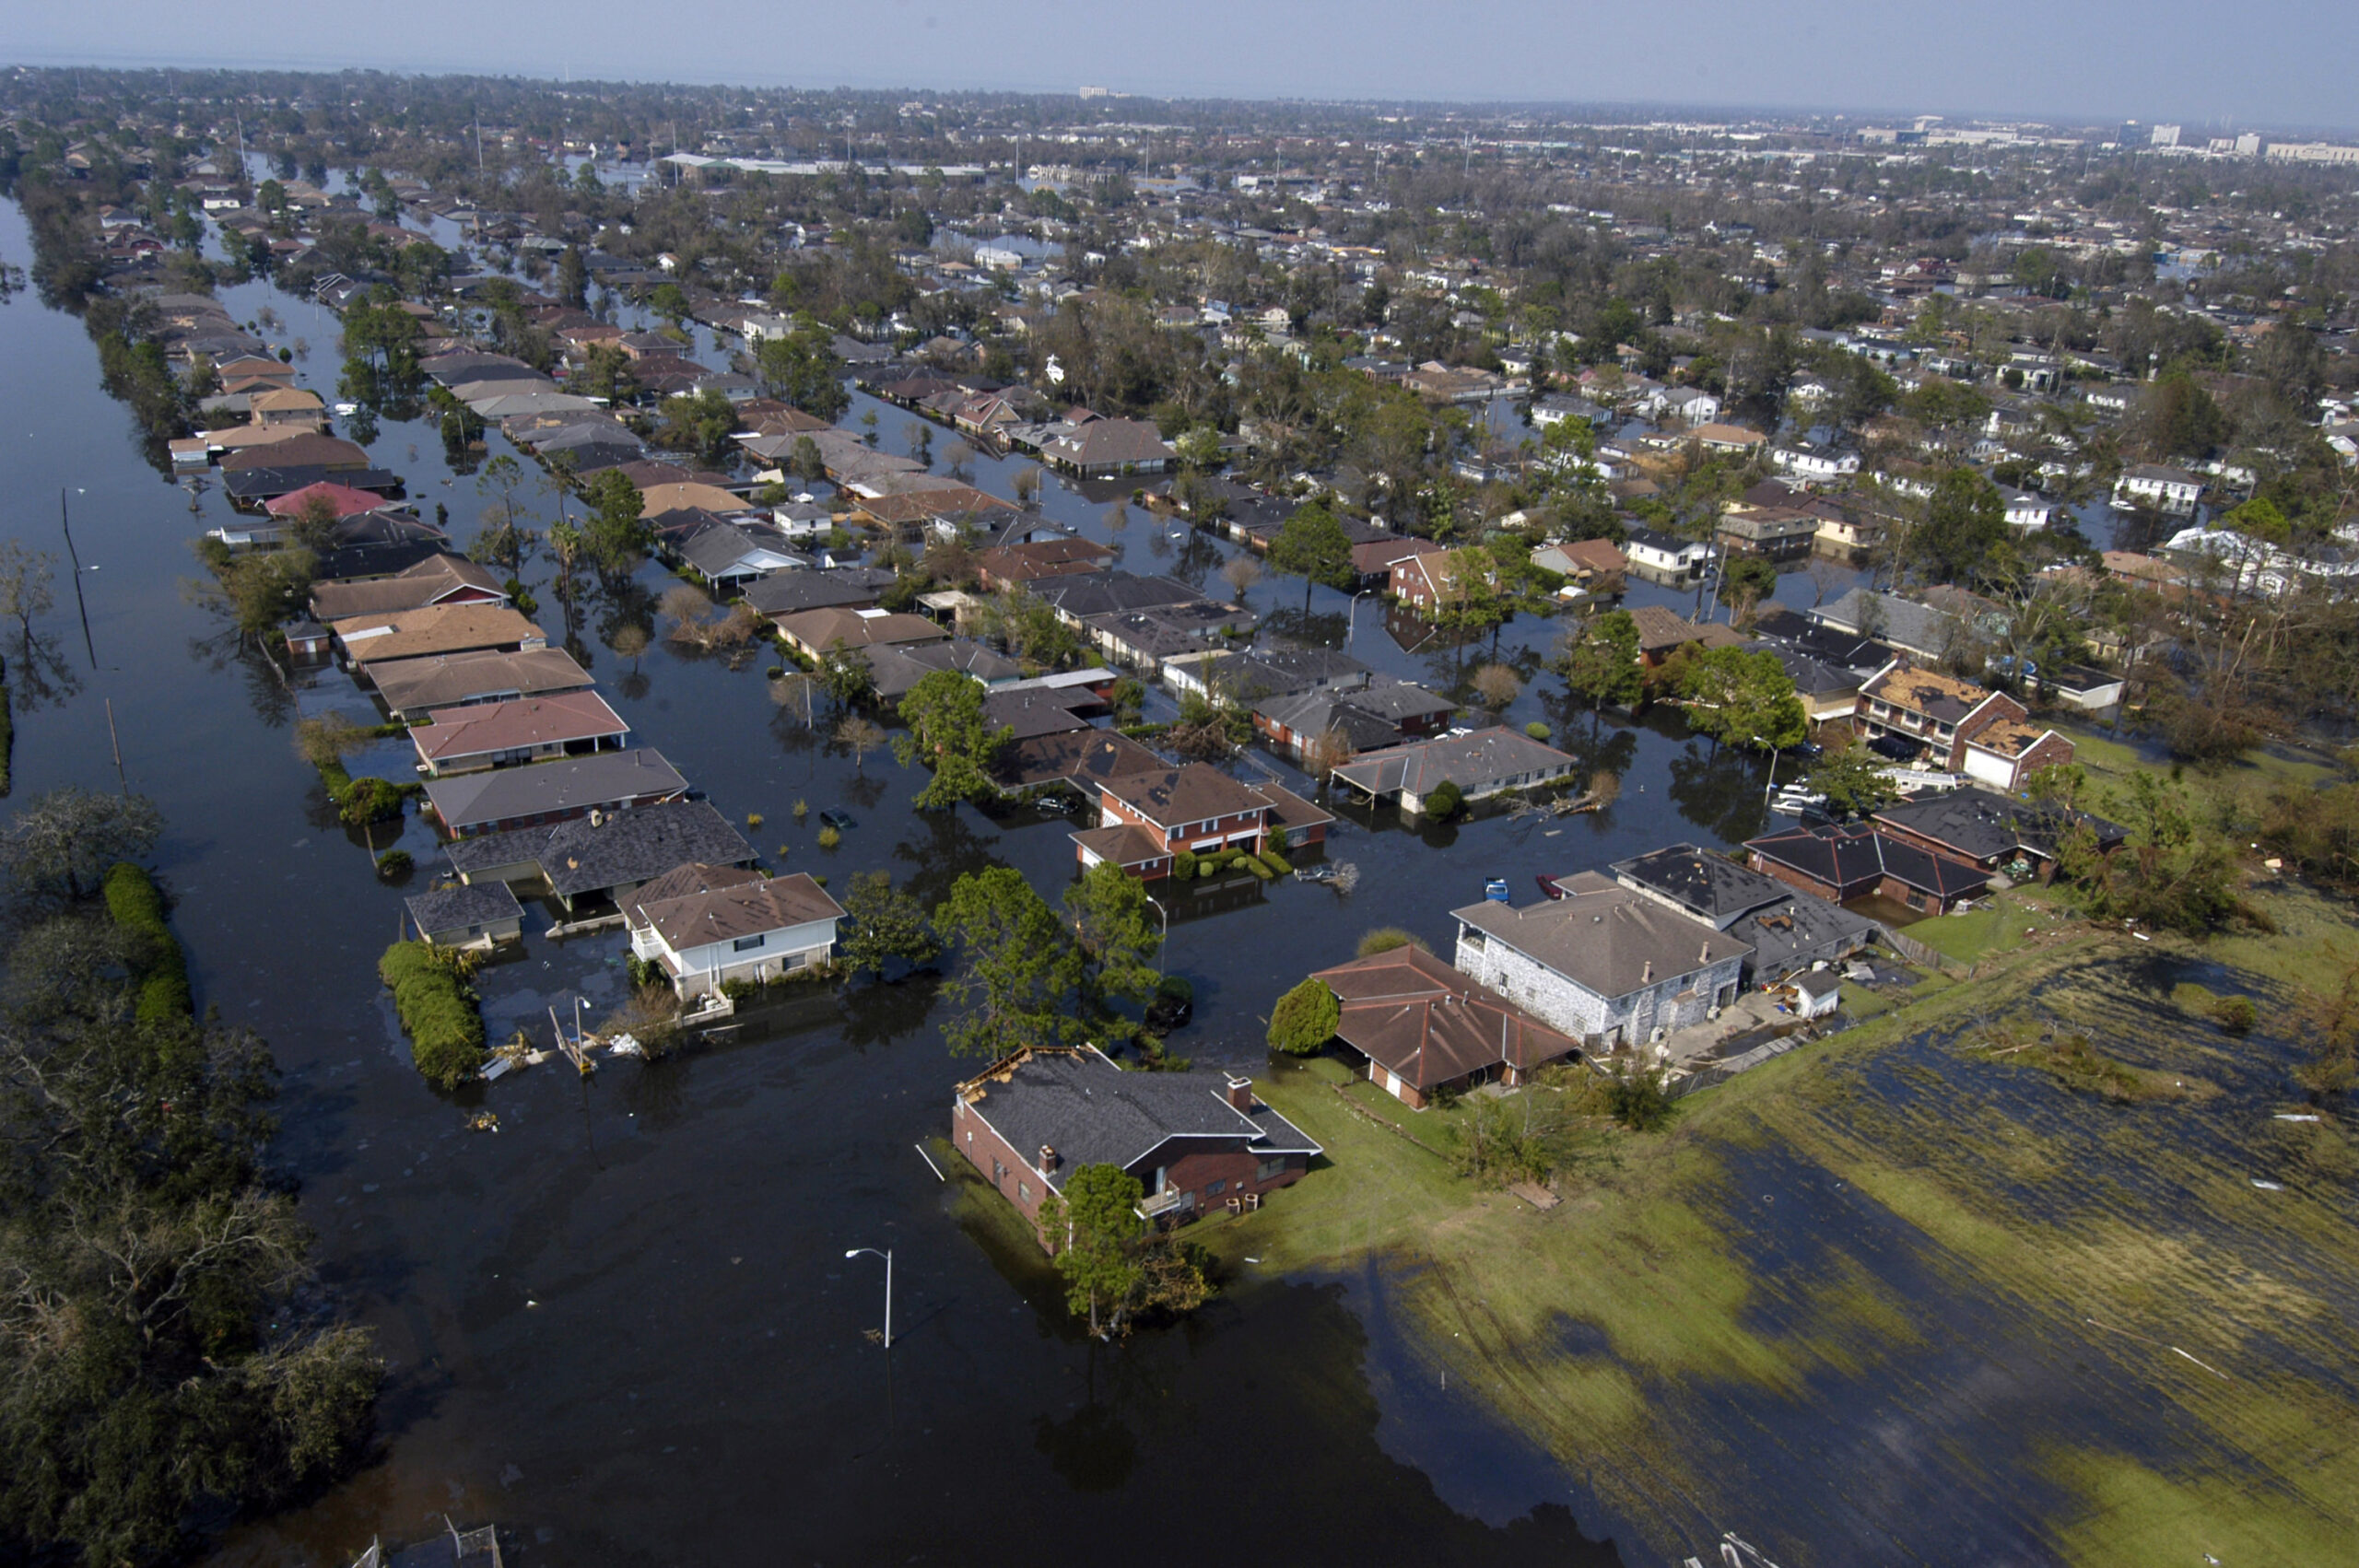 How Hurricane Katrina Reshaped the Atmosphere: Impacts and Long-Term Effects